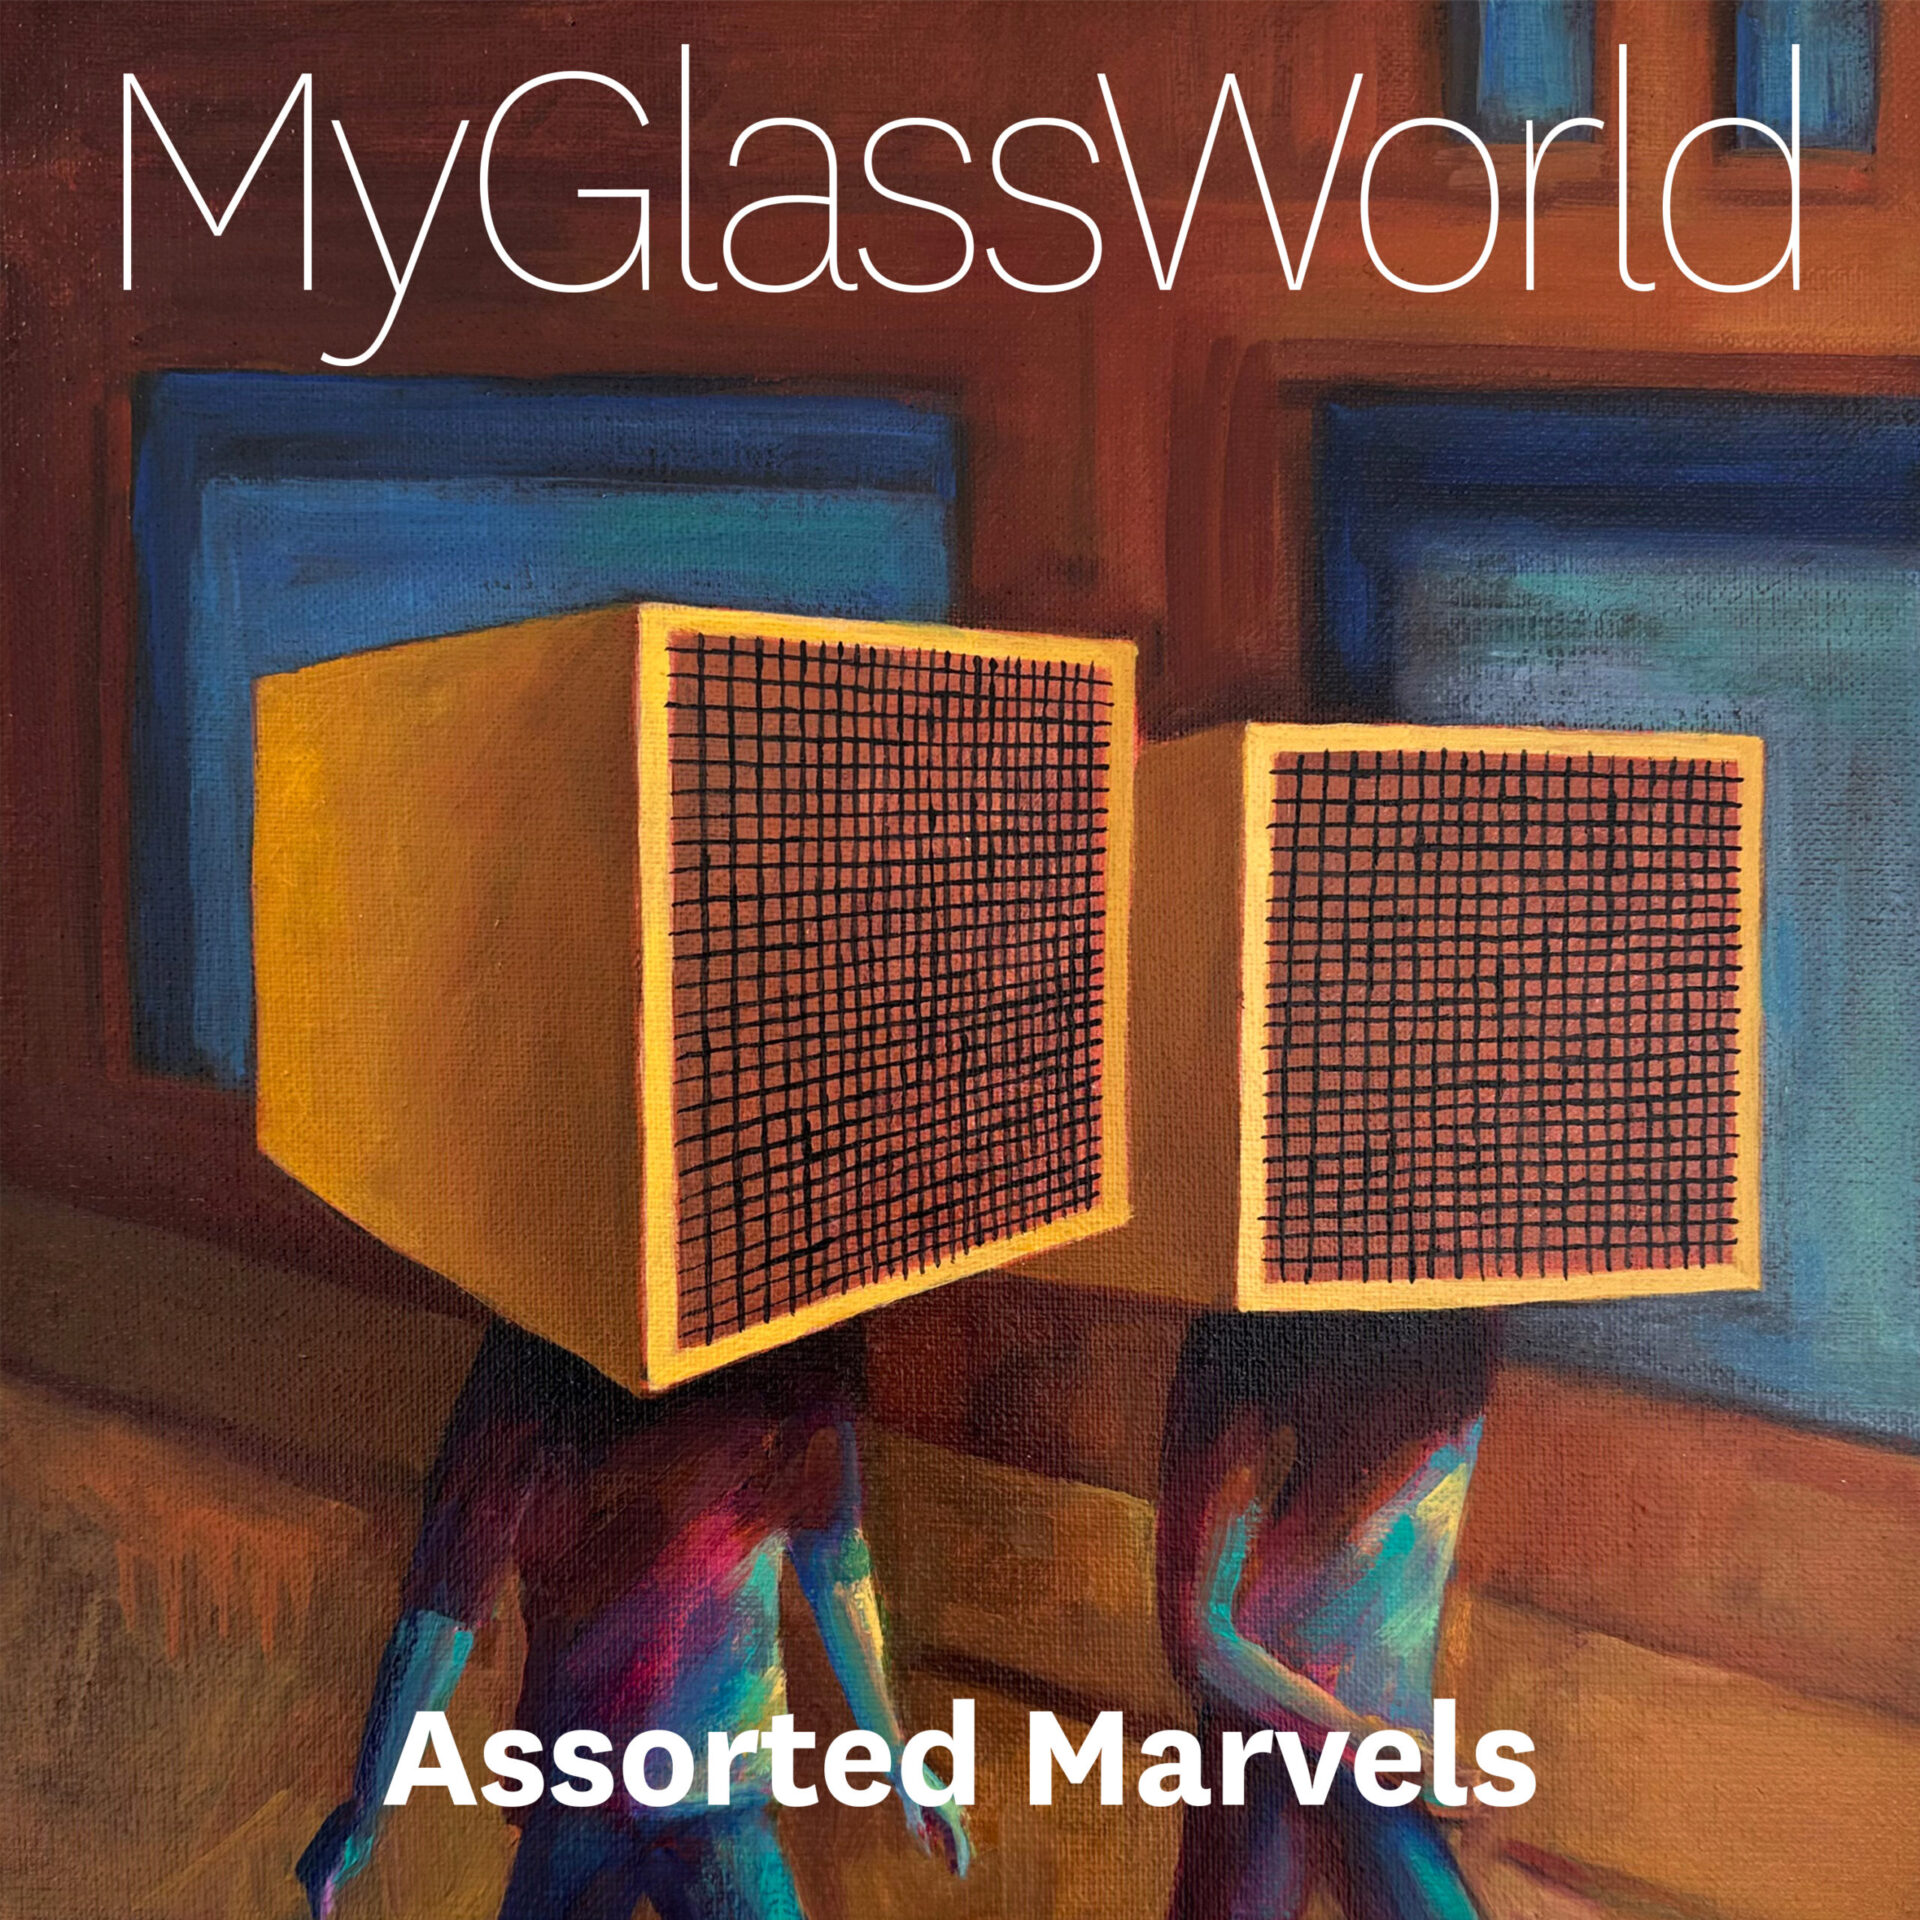 Assorted Marvels by MY GLASS WORLD (MGW) album cover